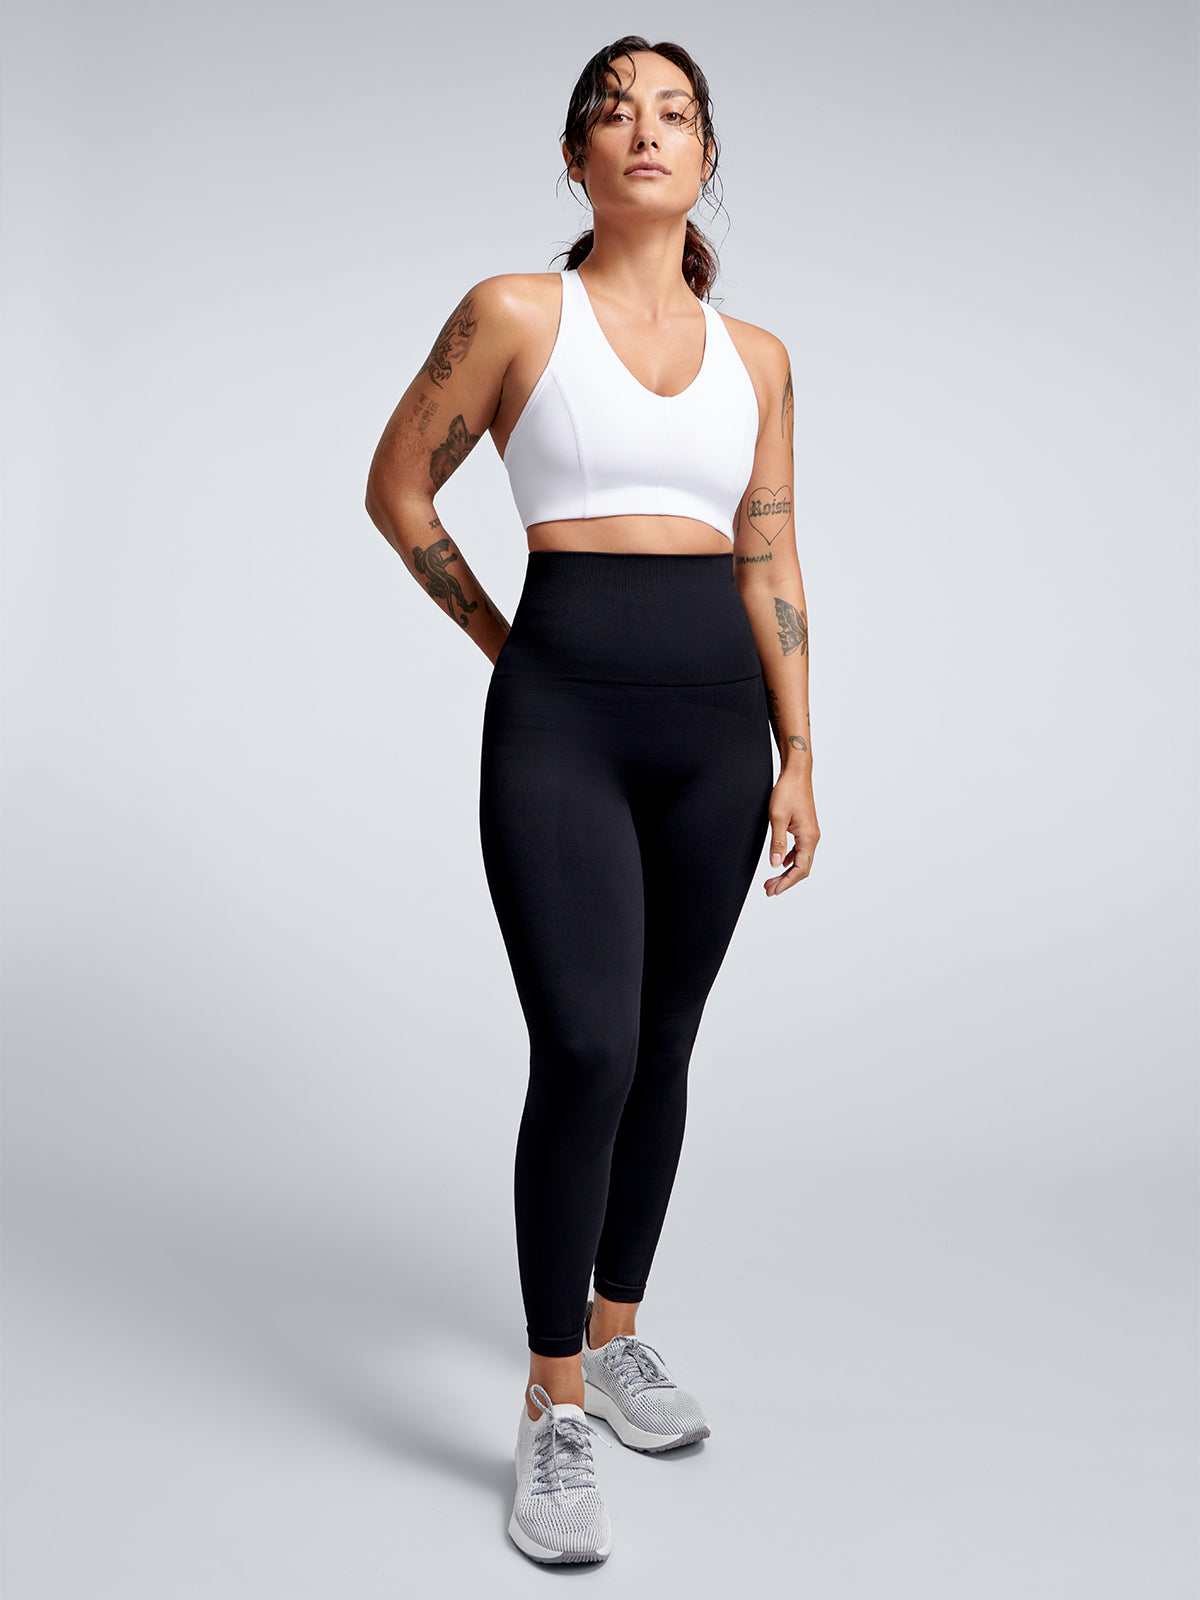 FEMME FATALE RECYCLED Sports Bra White